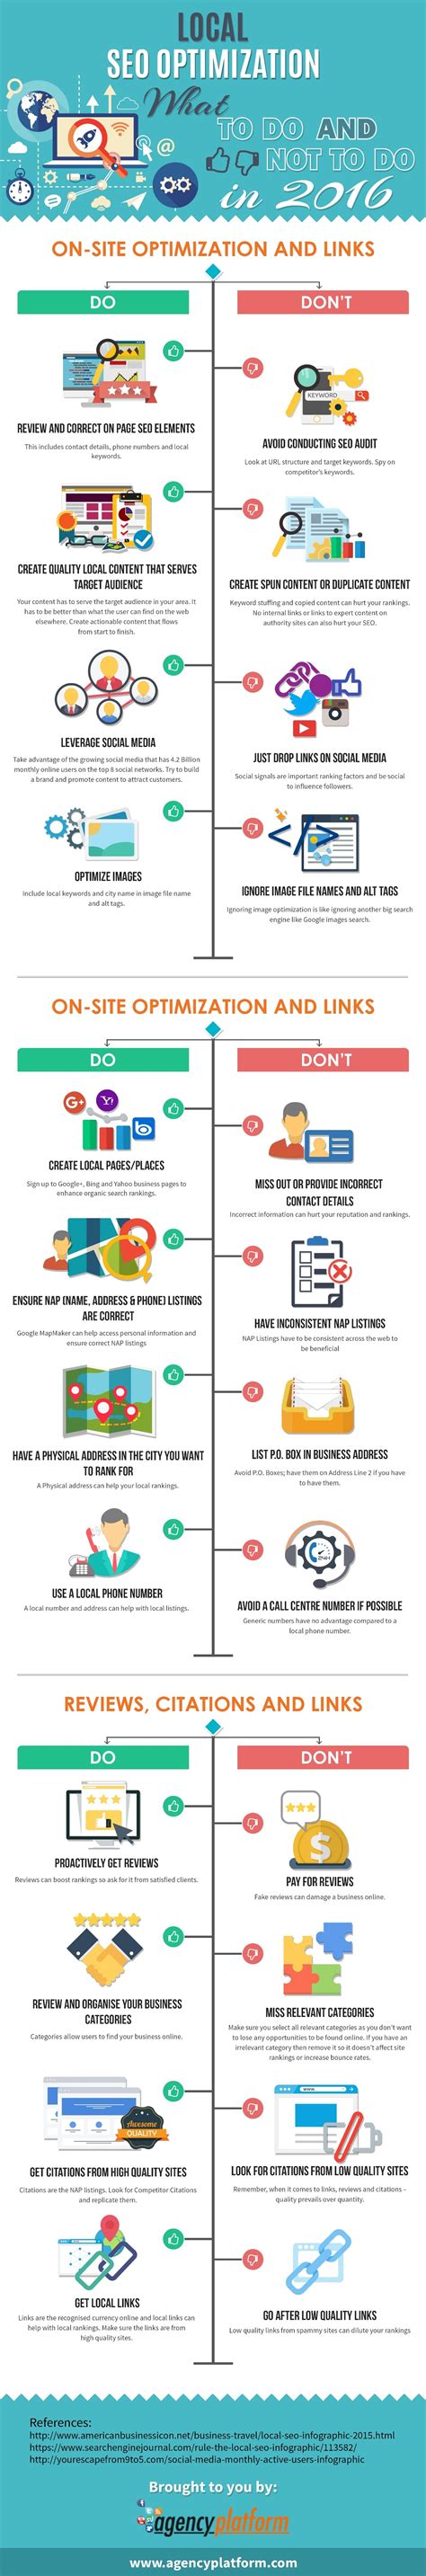 Local SEO in 2016: What to Do & Not to Do [Infographic]